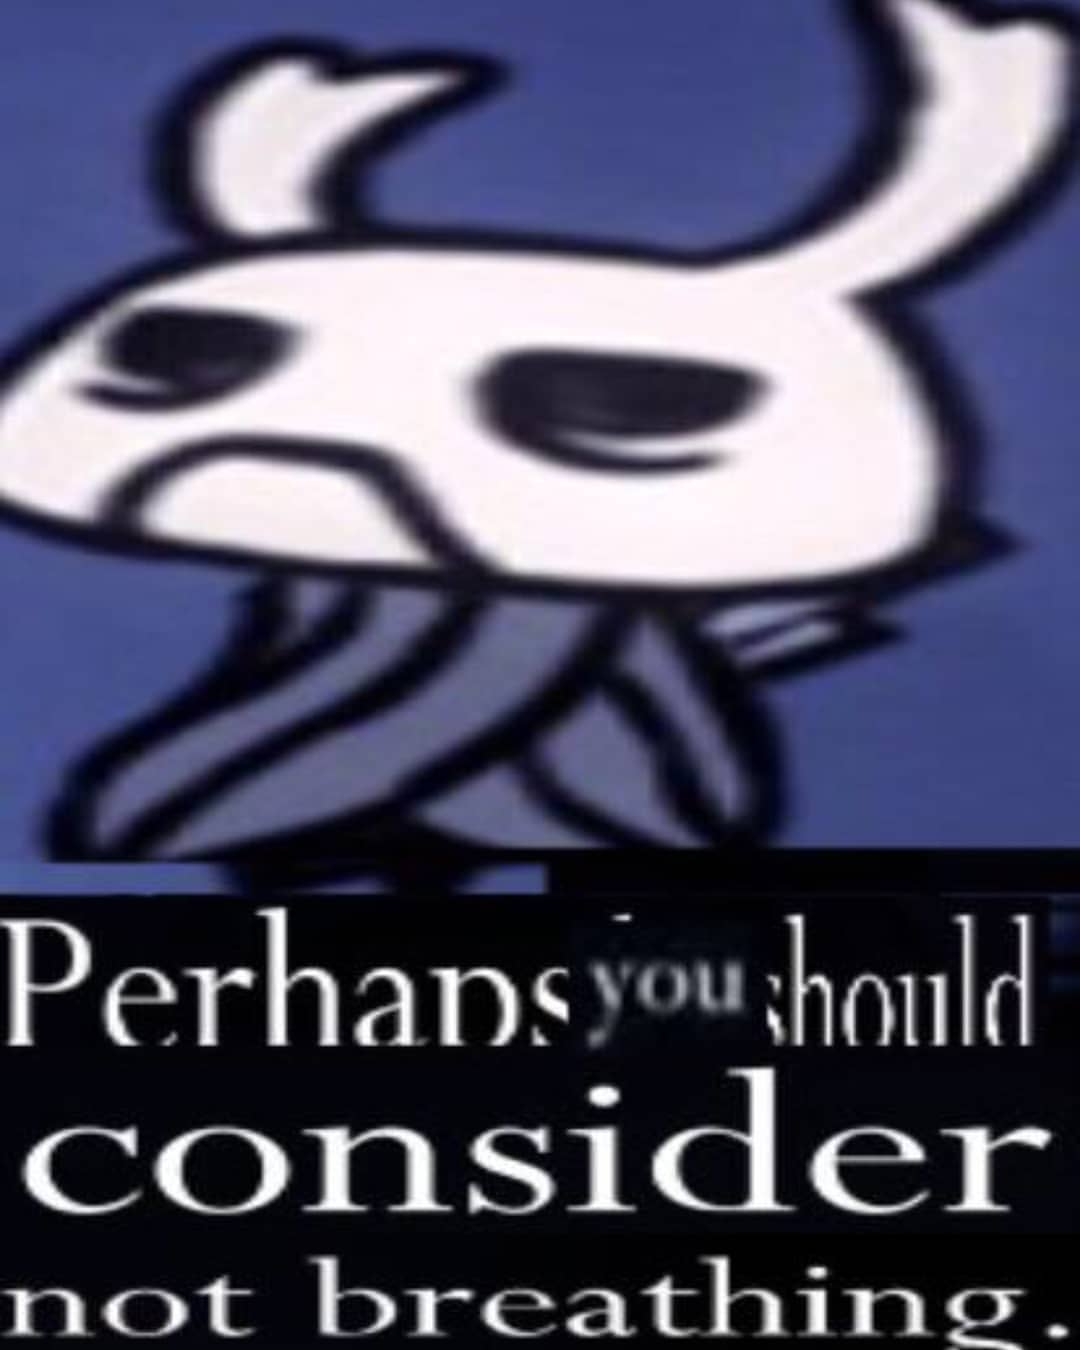 High Quality Hollow Knight "Not breathing" Blank Meme Template